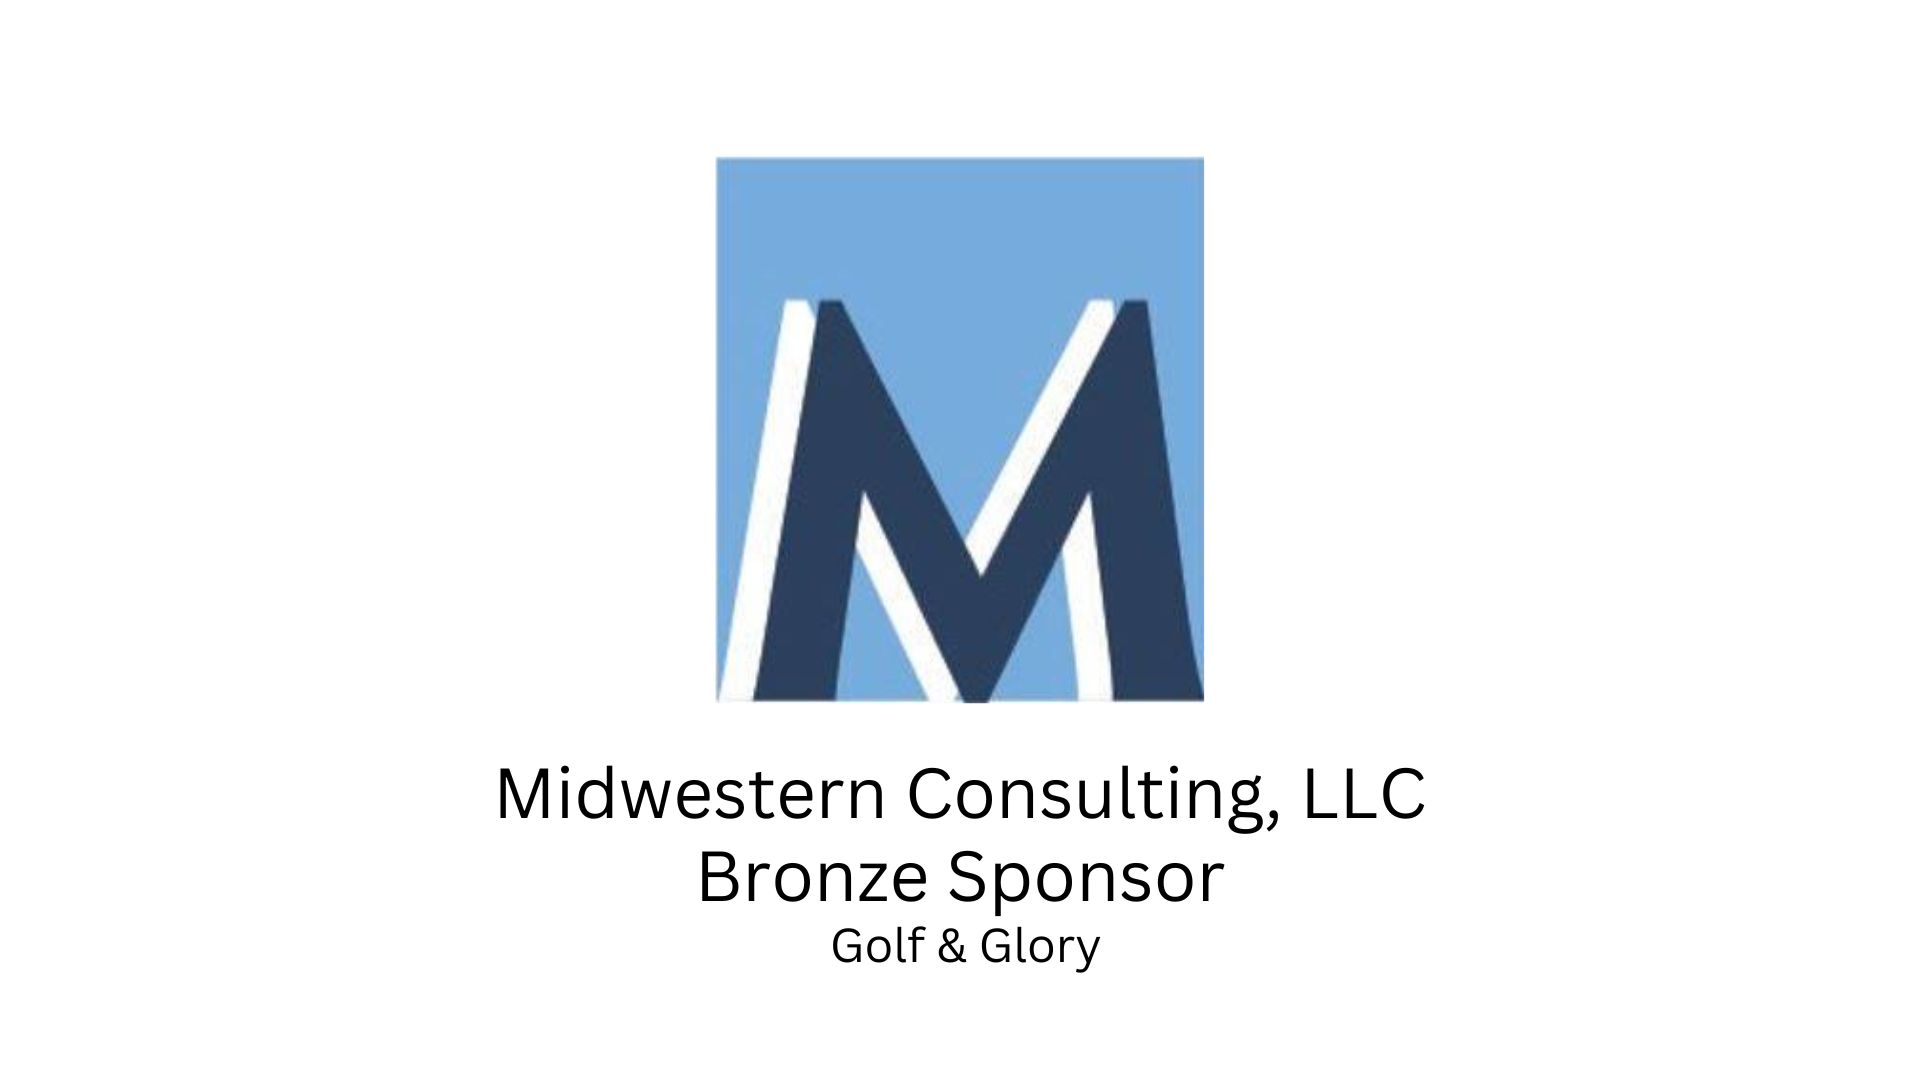 Midwestern Consulting 2022 Golf and Glory Sponsor